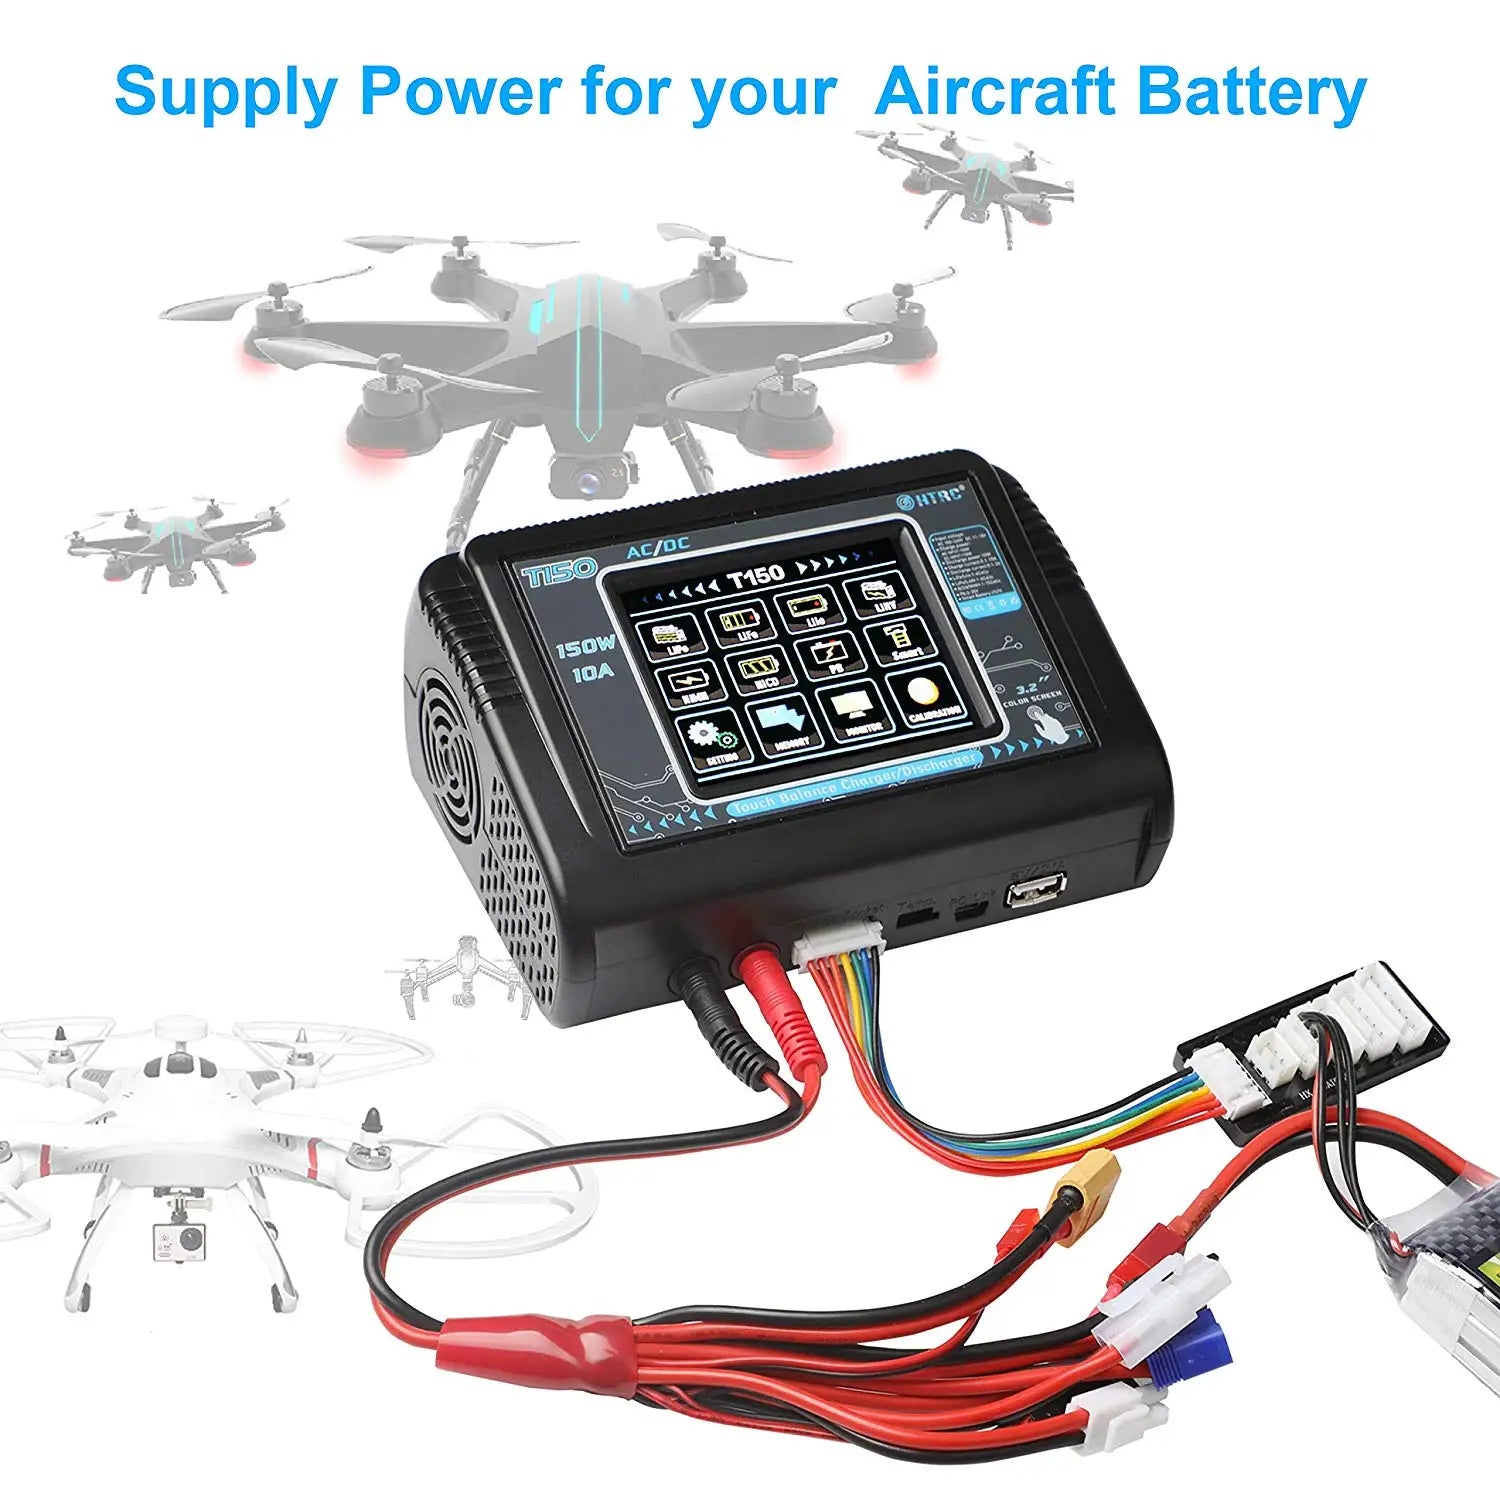 HTRC T240 Duo Lipo Charger, Aircraft Batteries Oitrc" 1s0w J0a .